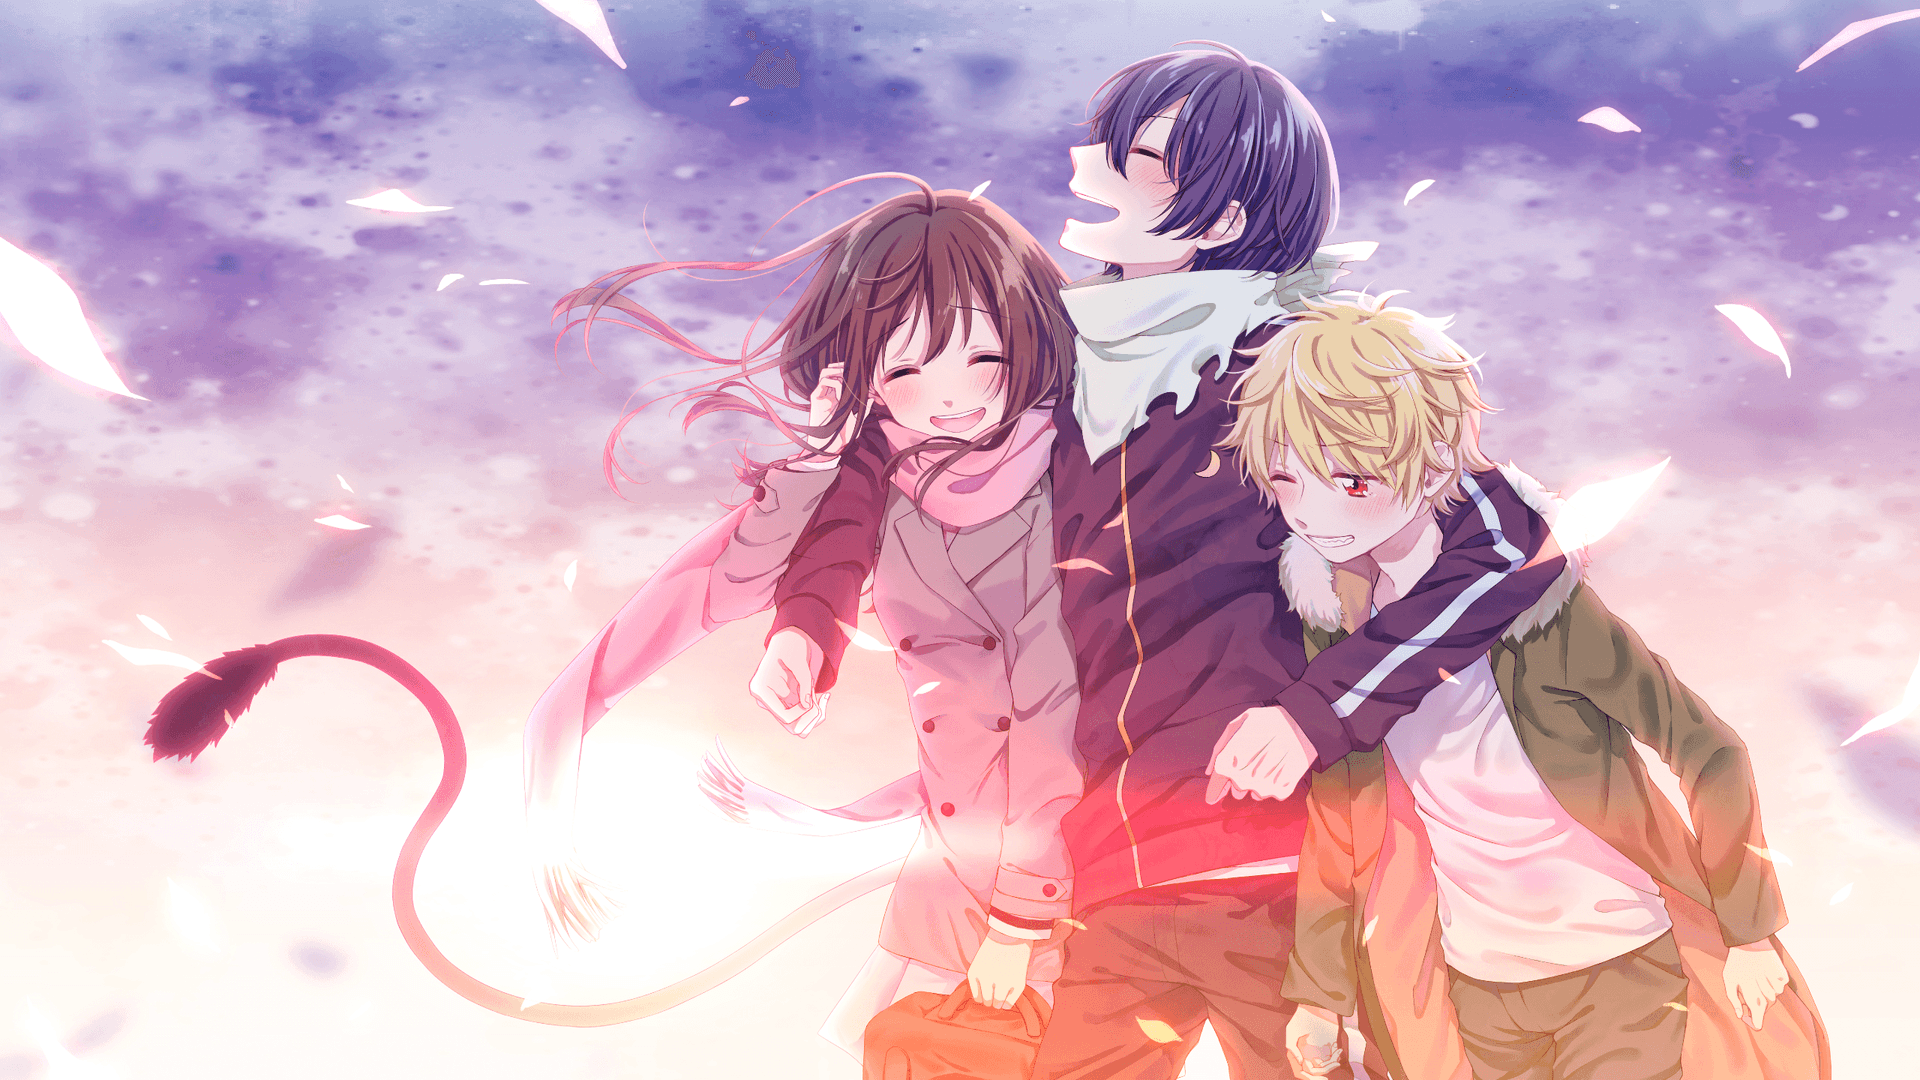 Spirits and gods coming together in the world of Noragami.